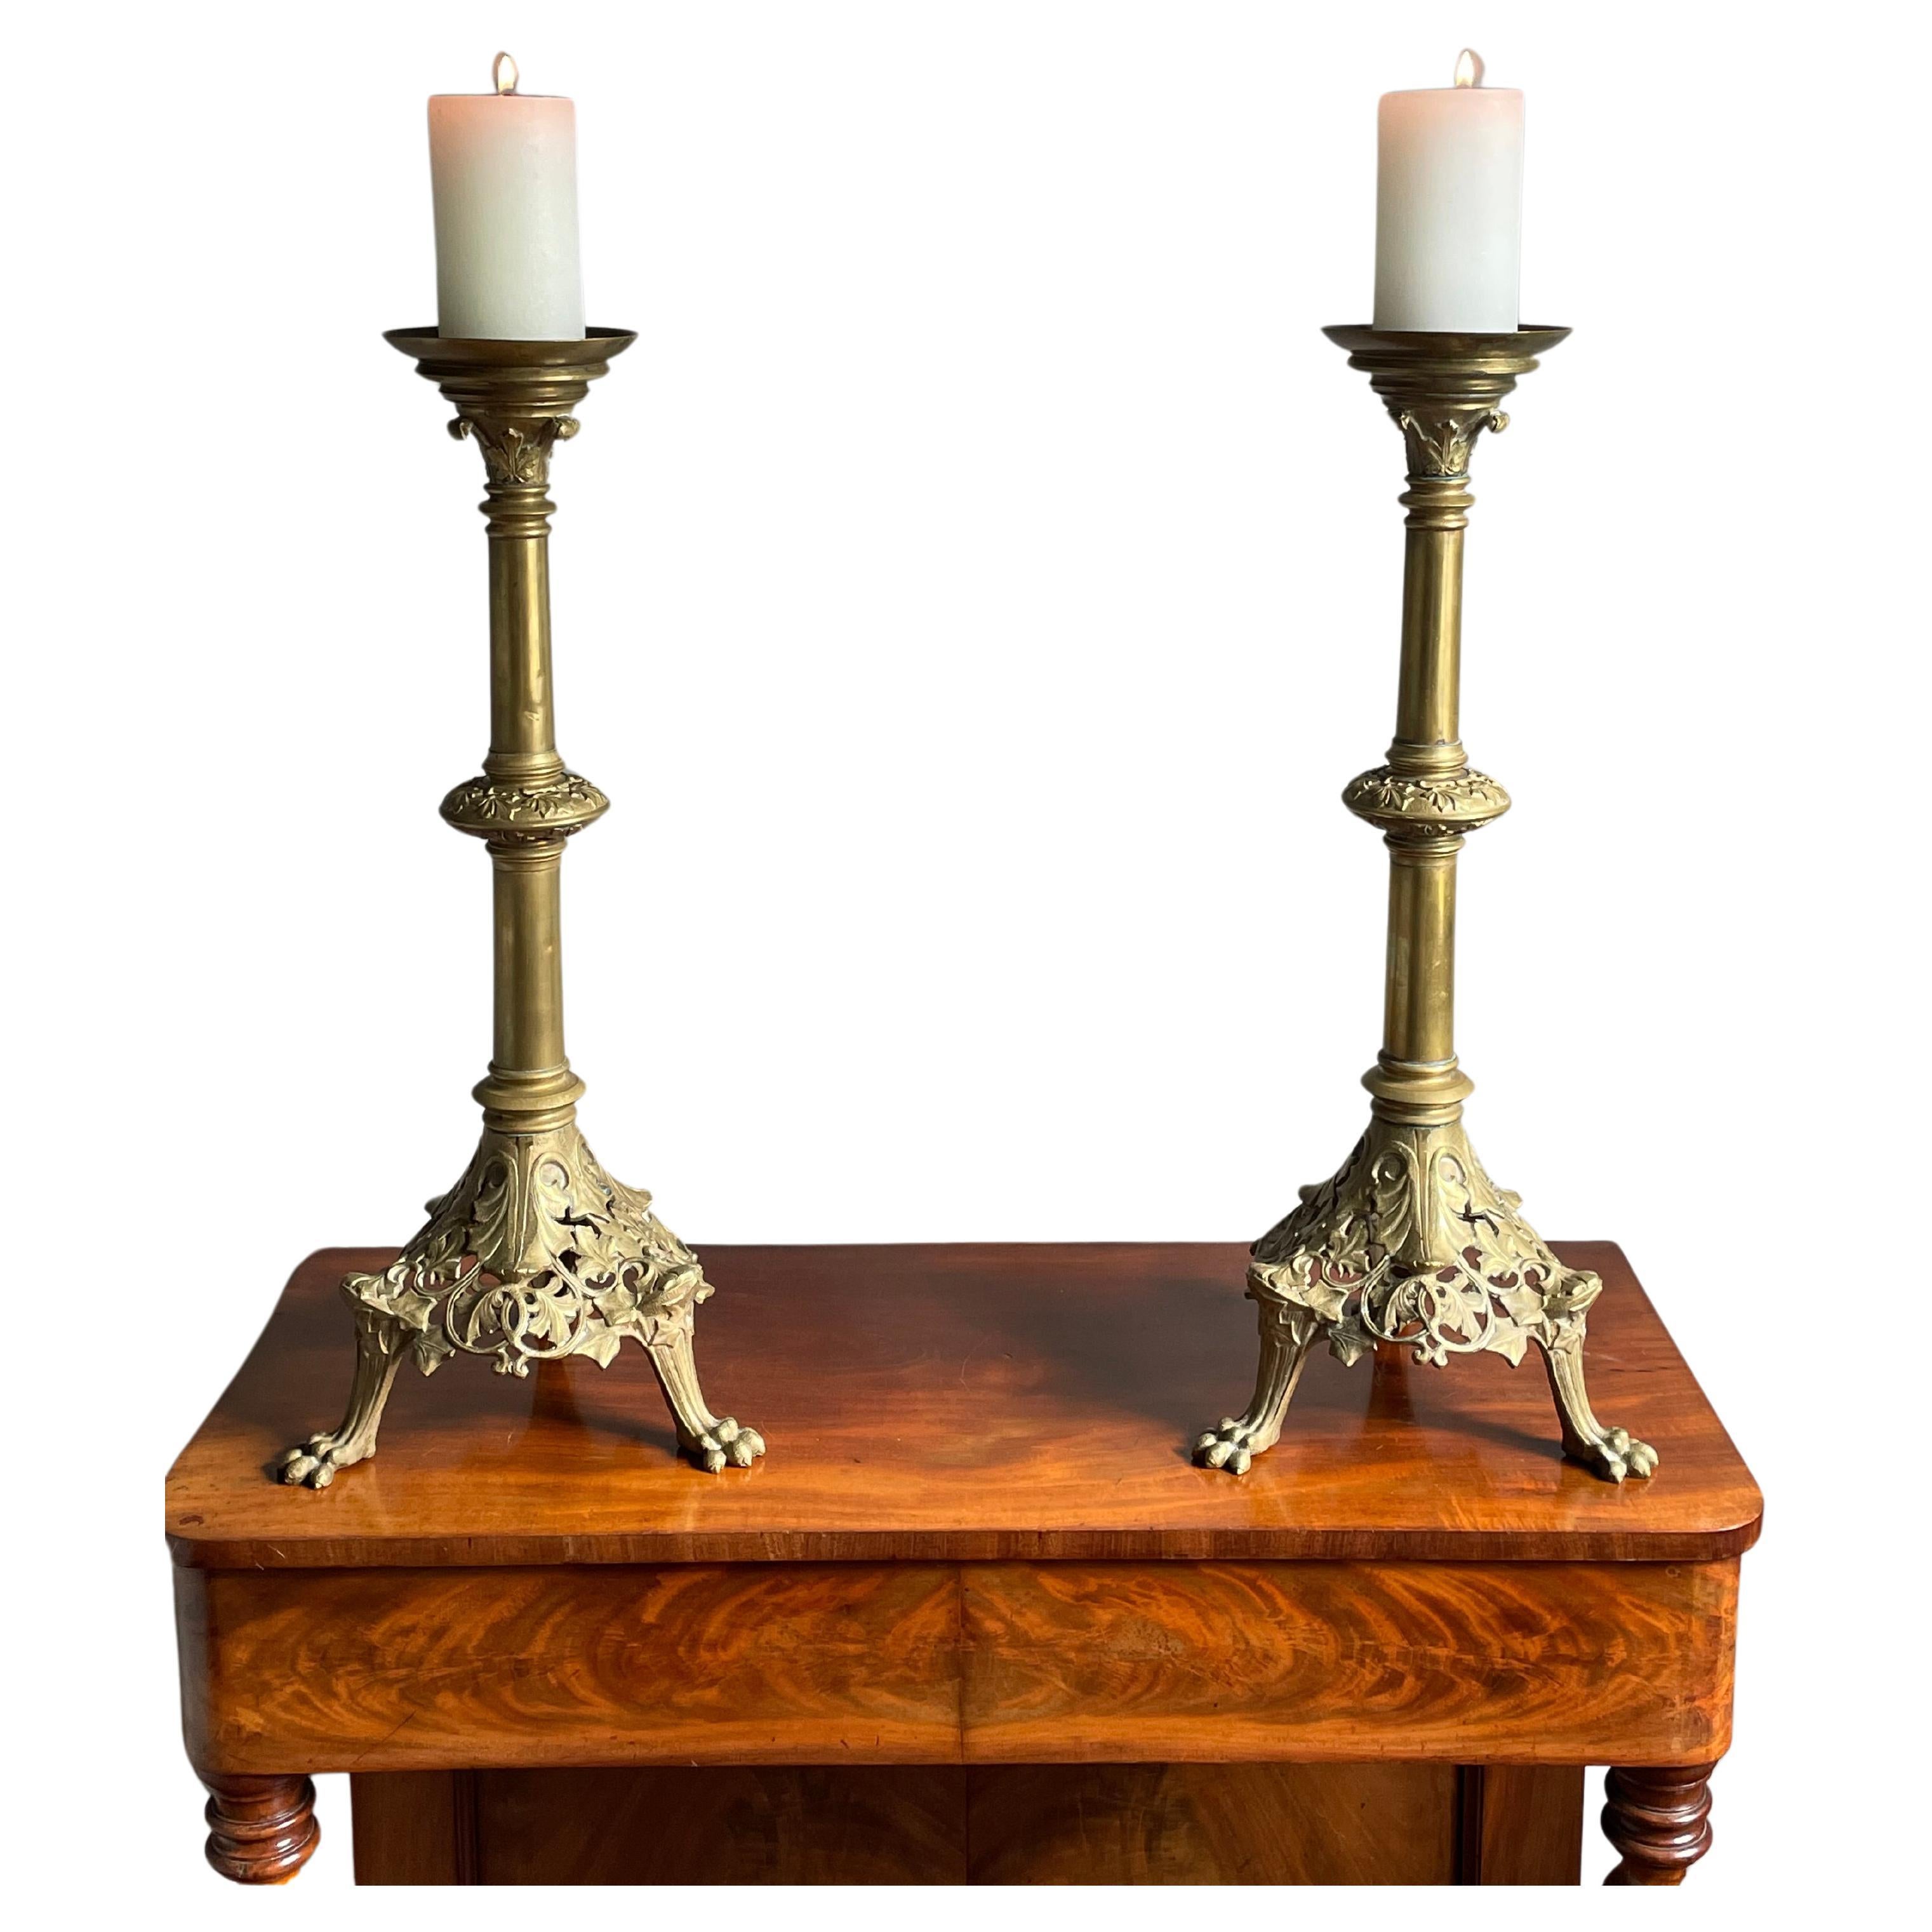 Antique Pair of Bronze Gothic Revival Church Altar Candlesticks / Candle Holders For Sale